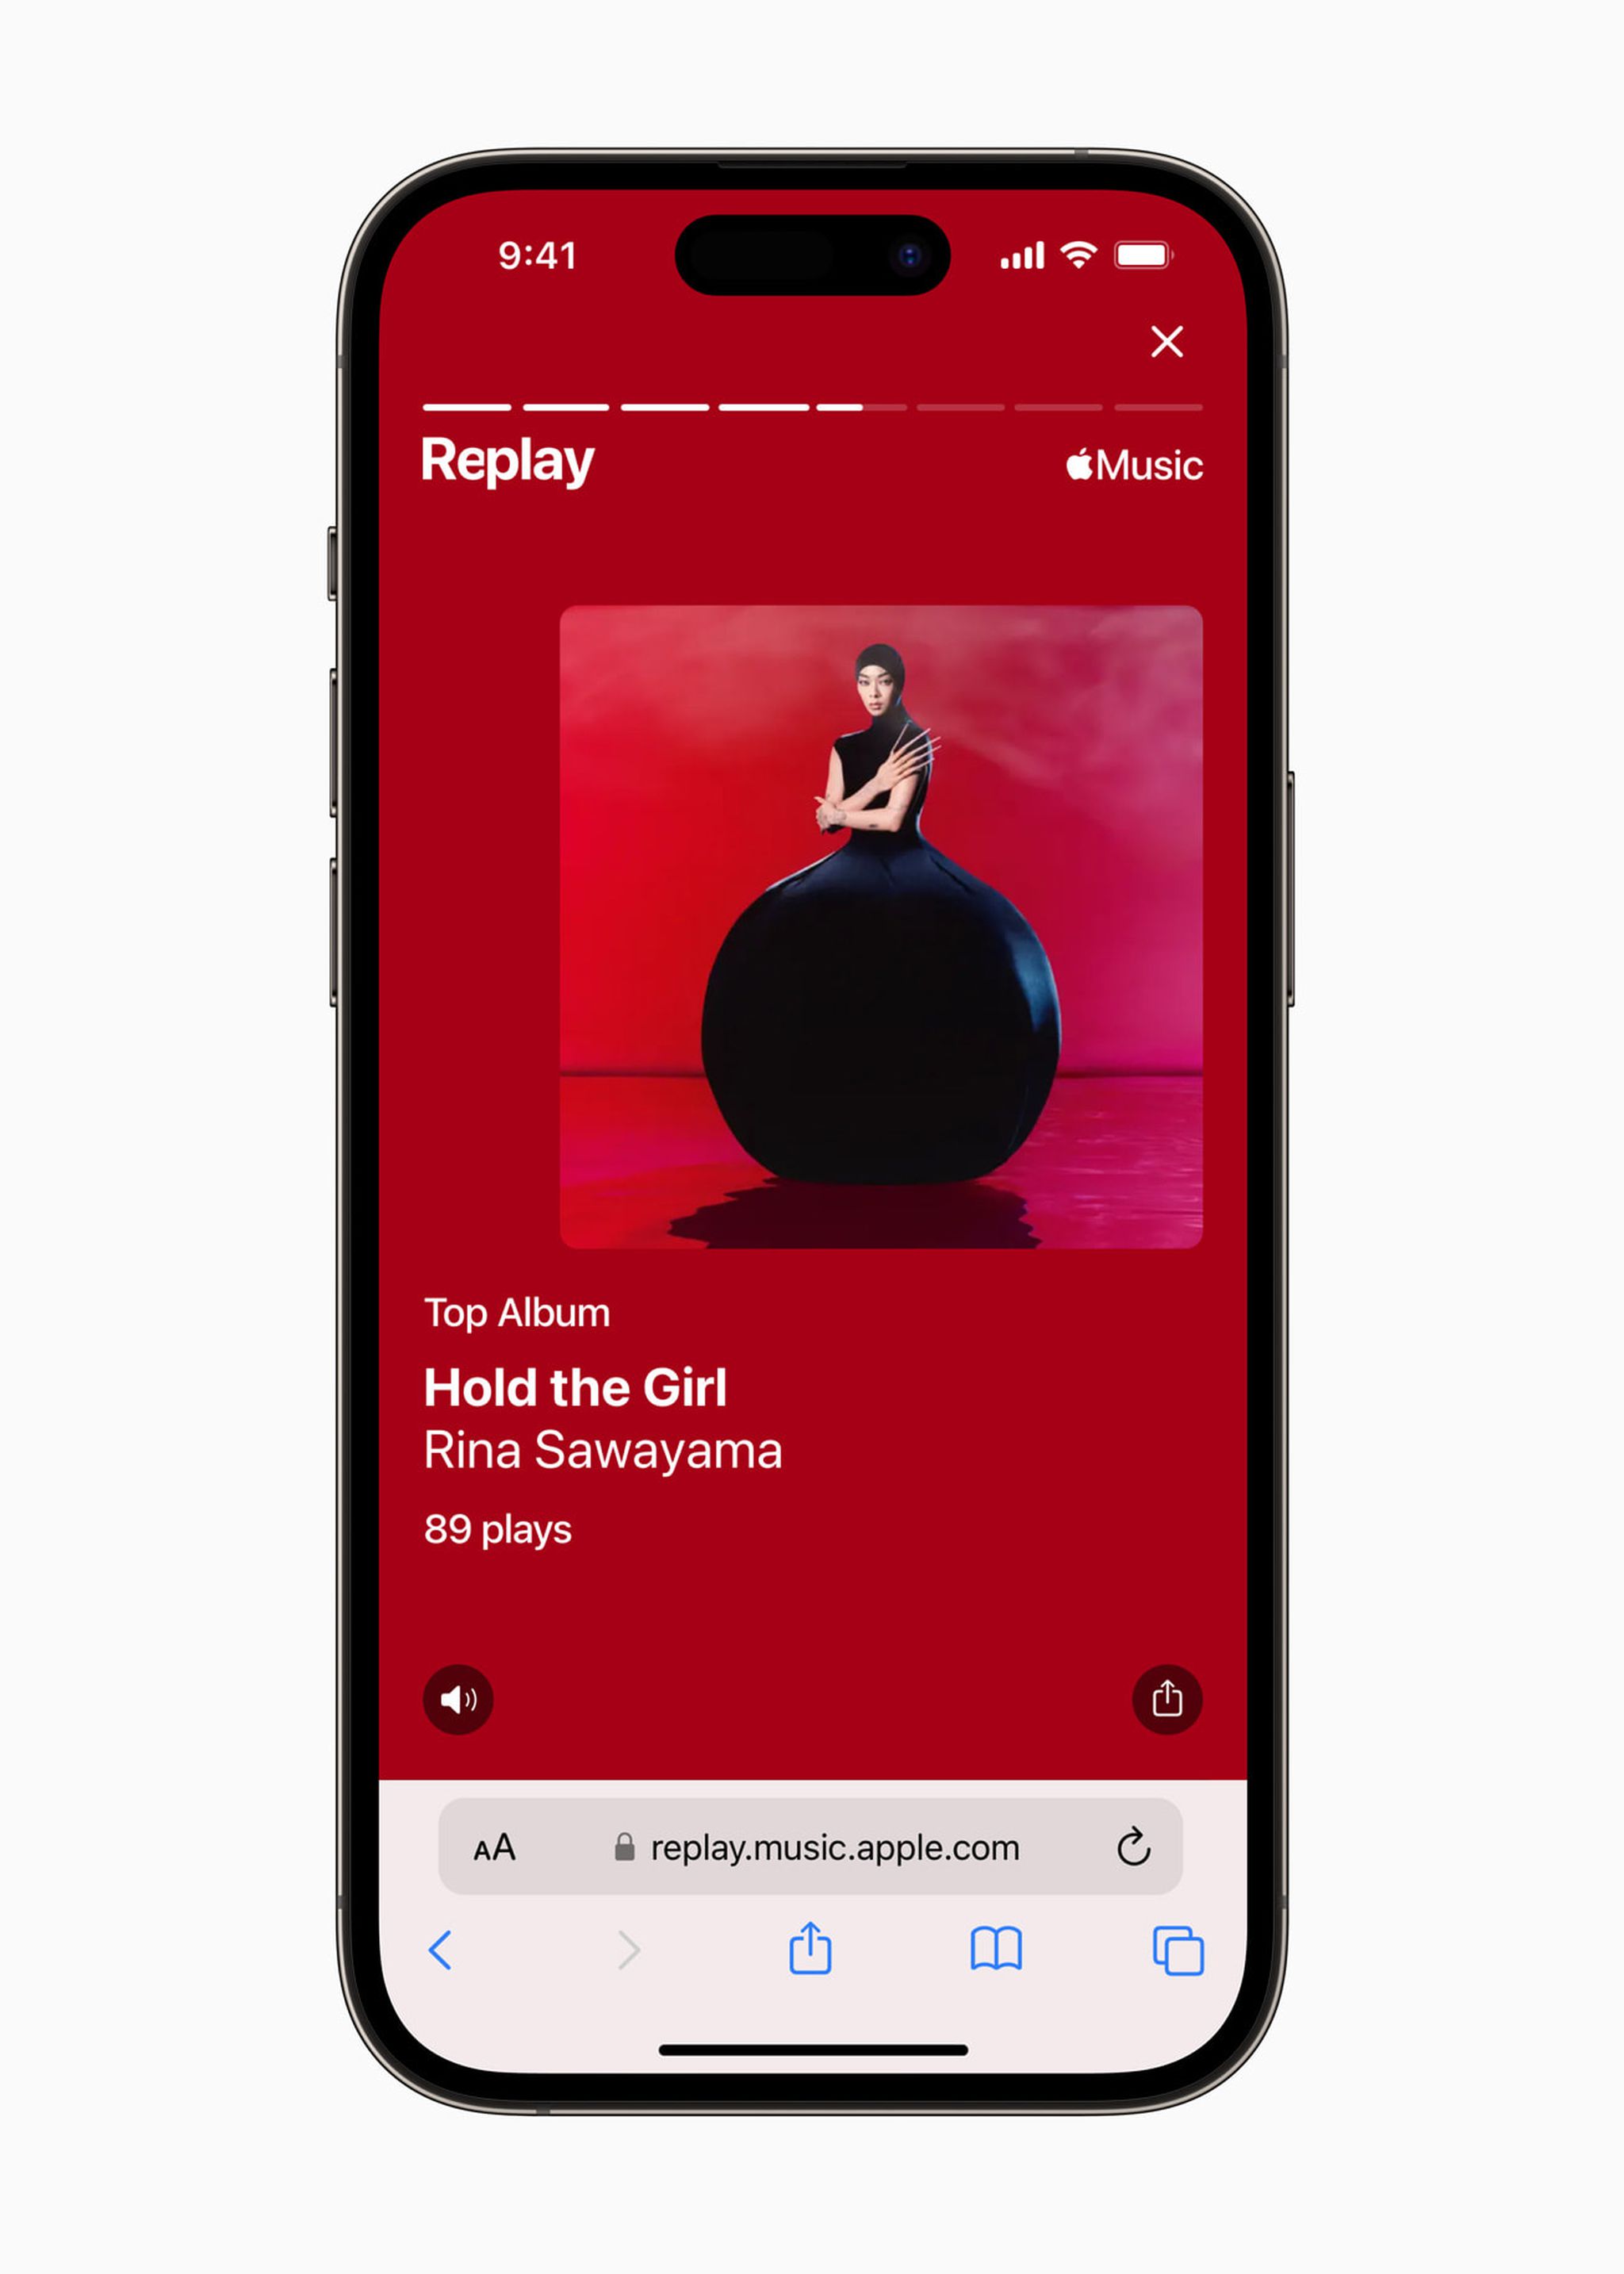 Apple Music’s yearend roundup, Replay, is a little better this year